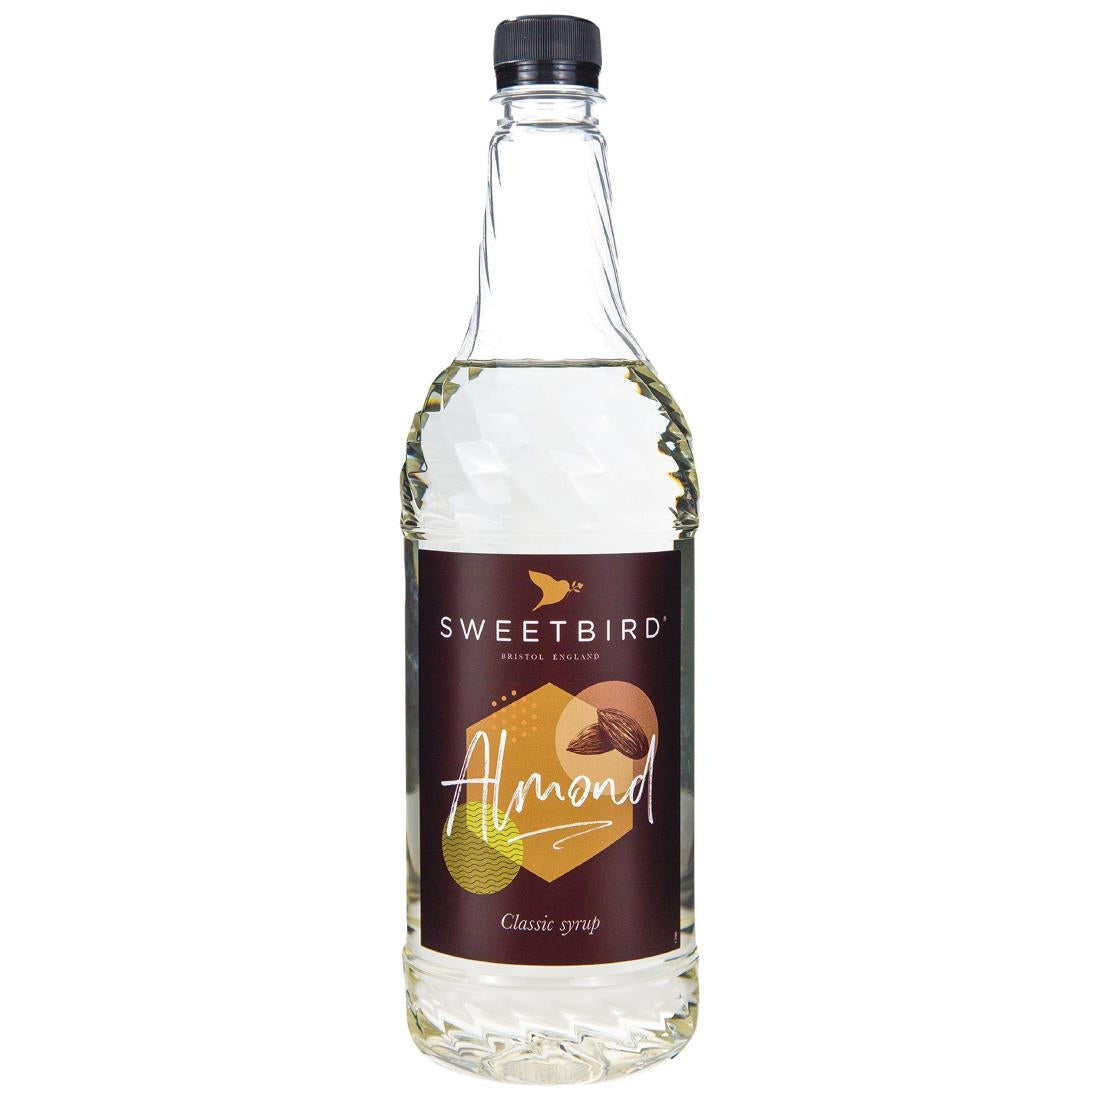 CZ250 Sweetbird Almond Classic Syrup 1Ltr